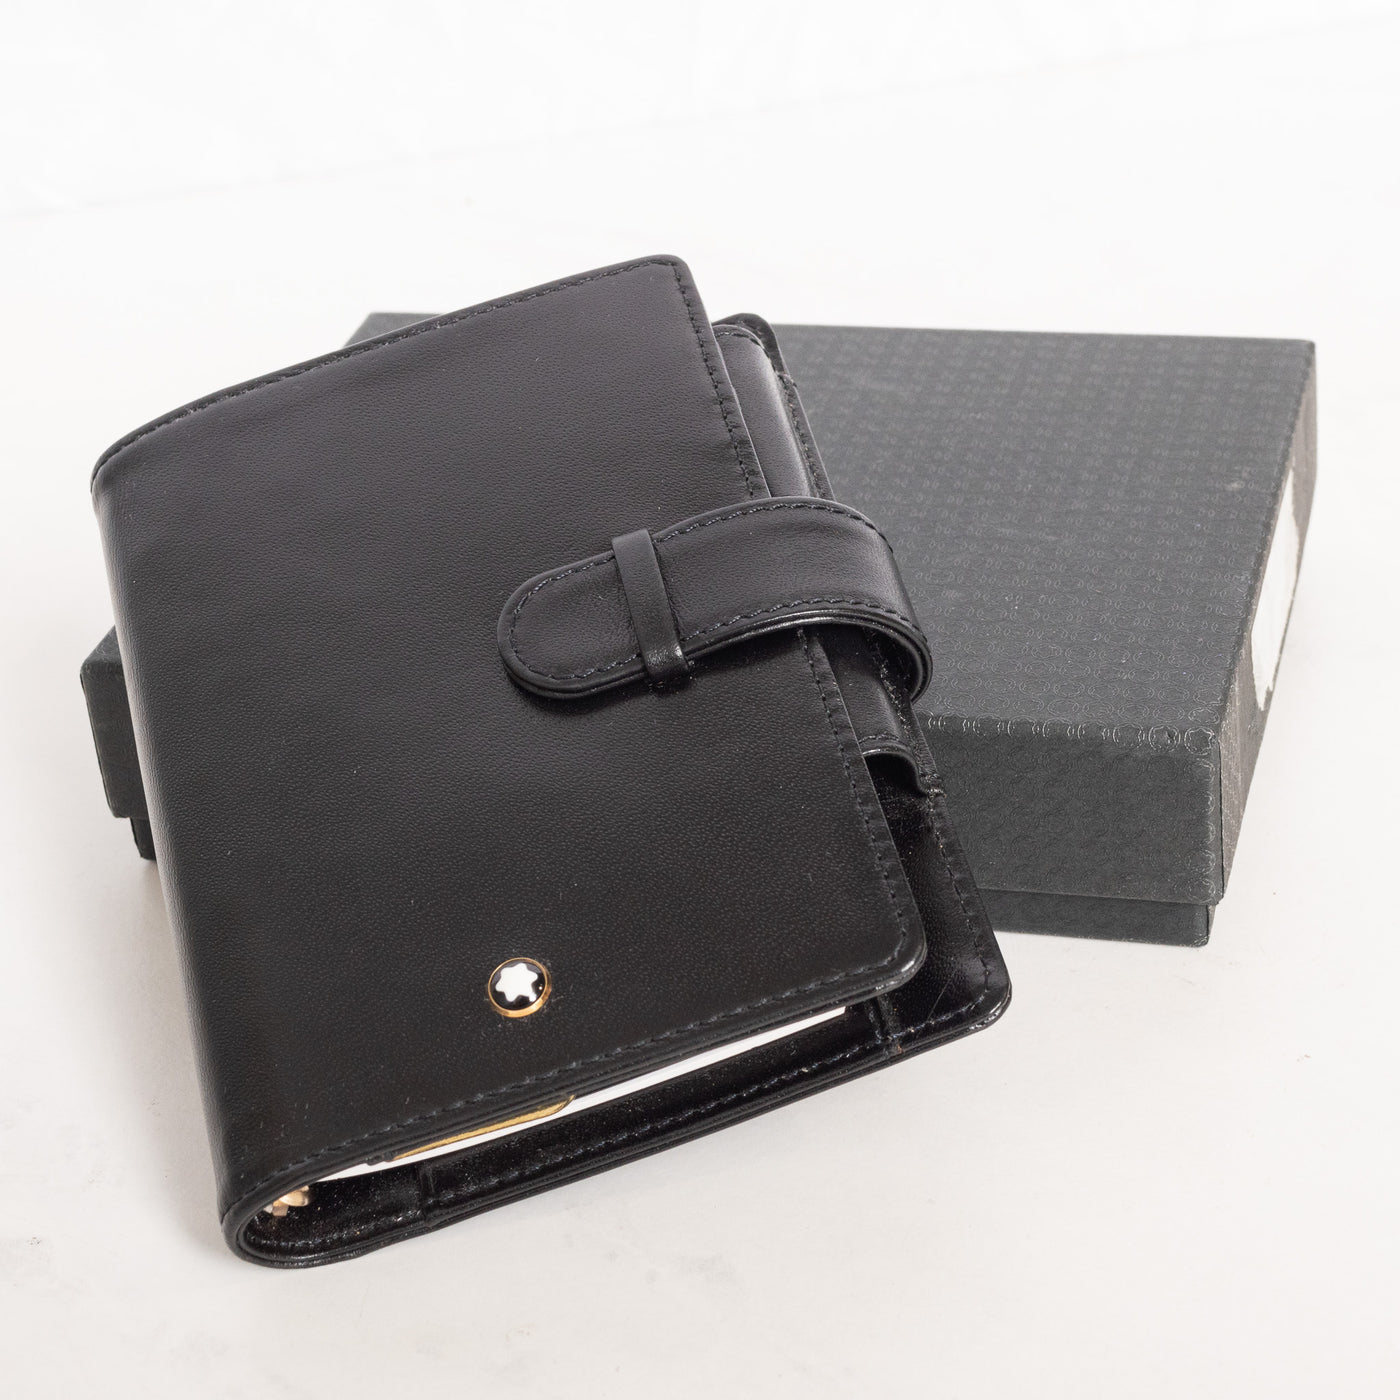 Montblanc Leather Goods Meisterstuck A7 Black Leather Pocket Organizer 14876 - Preowned